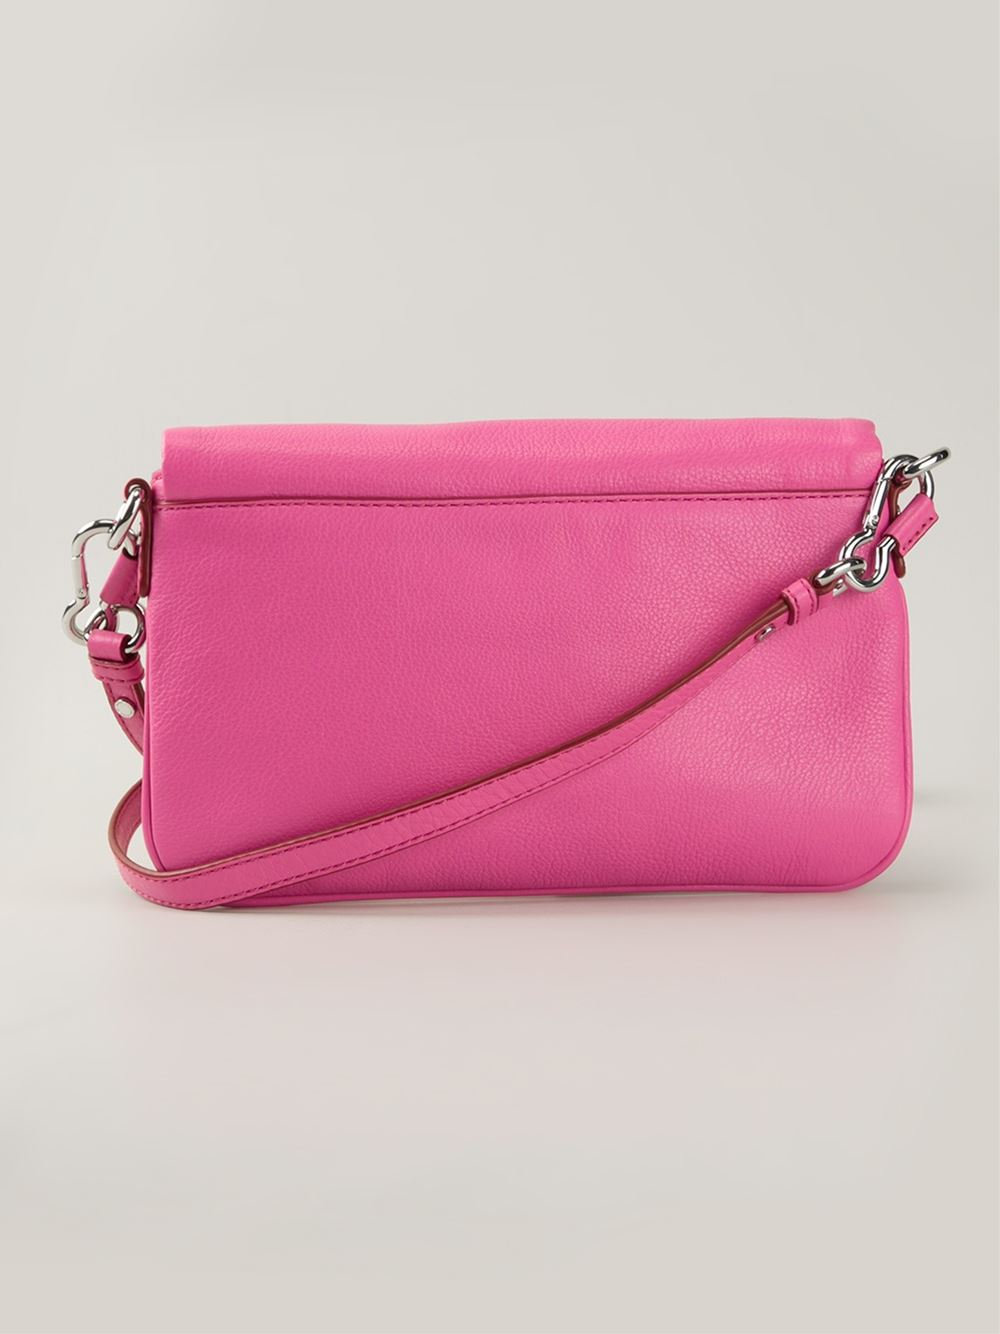 Marc by marc jacobs 'Too Hot To Handle Flap Percy' Crossbody Bag in ...